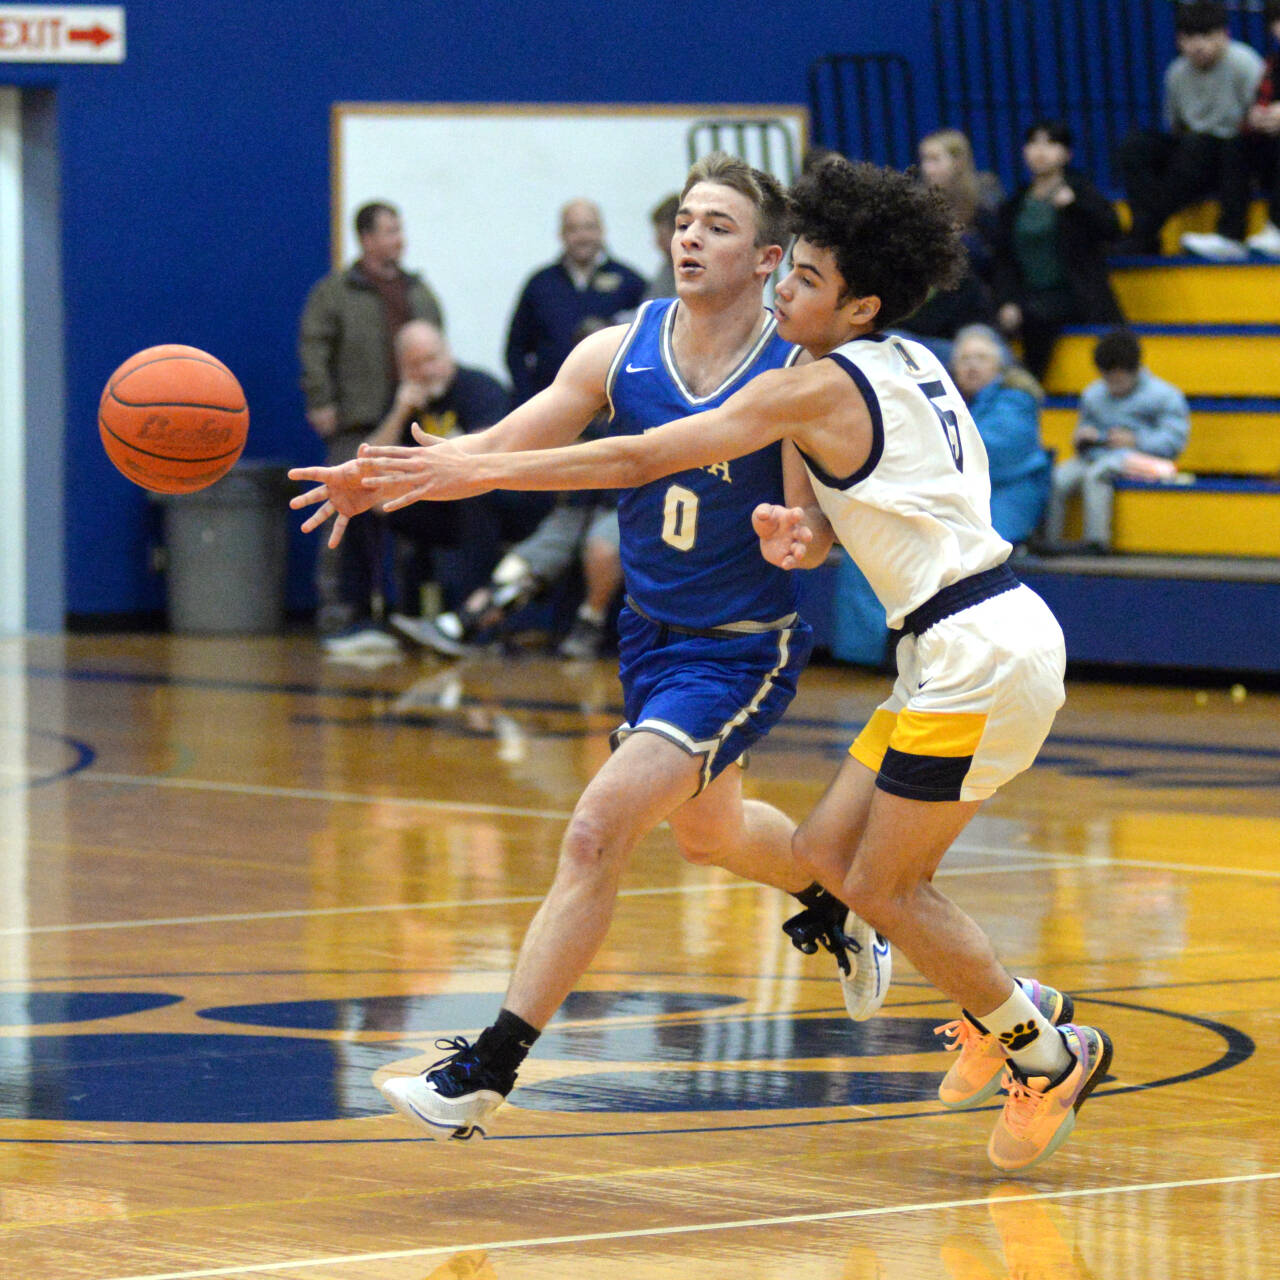 RYAN SPARKS | THE DAILY WORLD 
Elma’s Traden Carter (0) passes the ball while hounded by Aberdeen guard Isaac Garcia during the Eagles’ 59-30 win on Wednesday at Aberdeen High School.